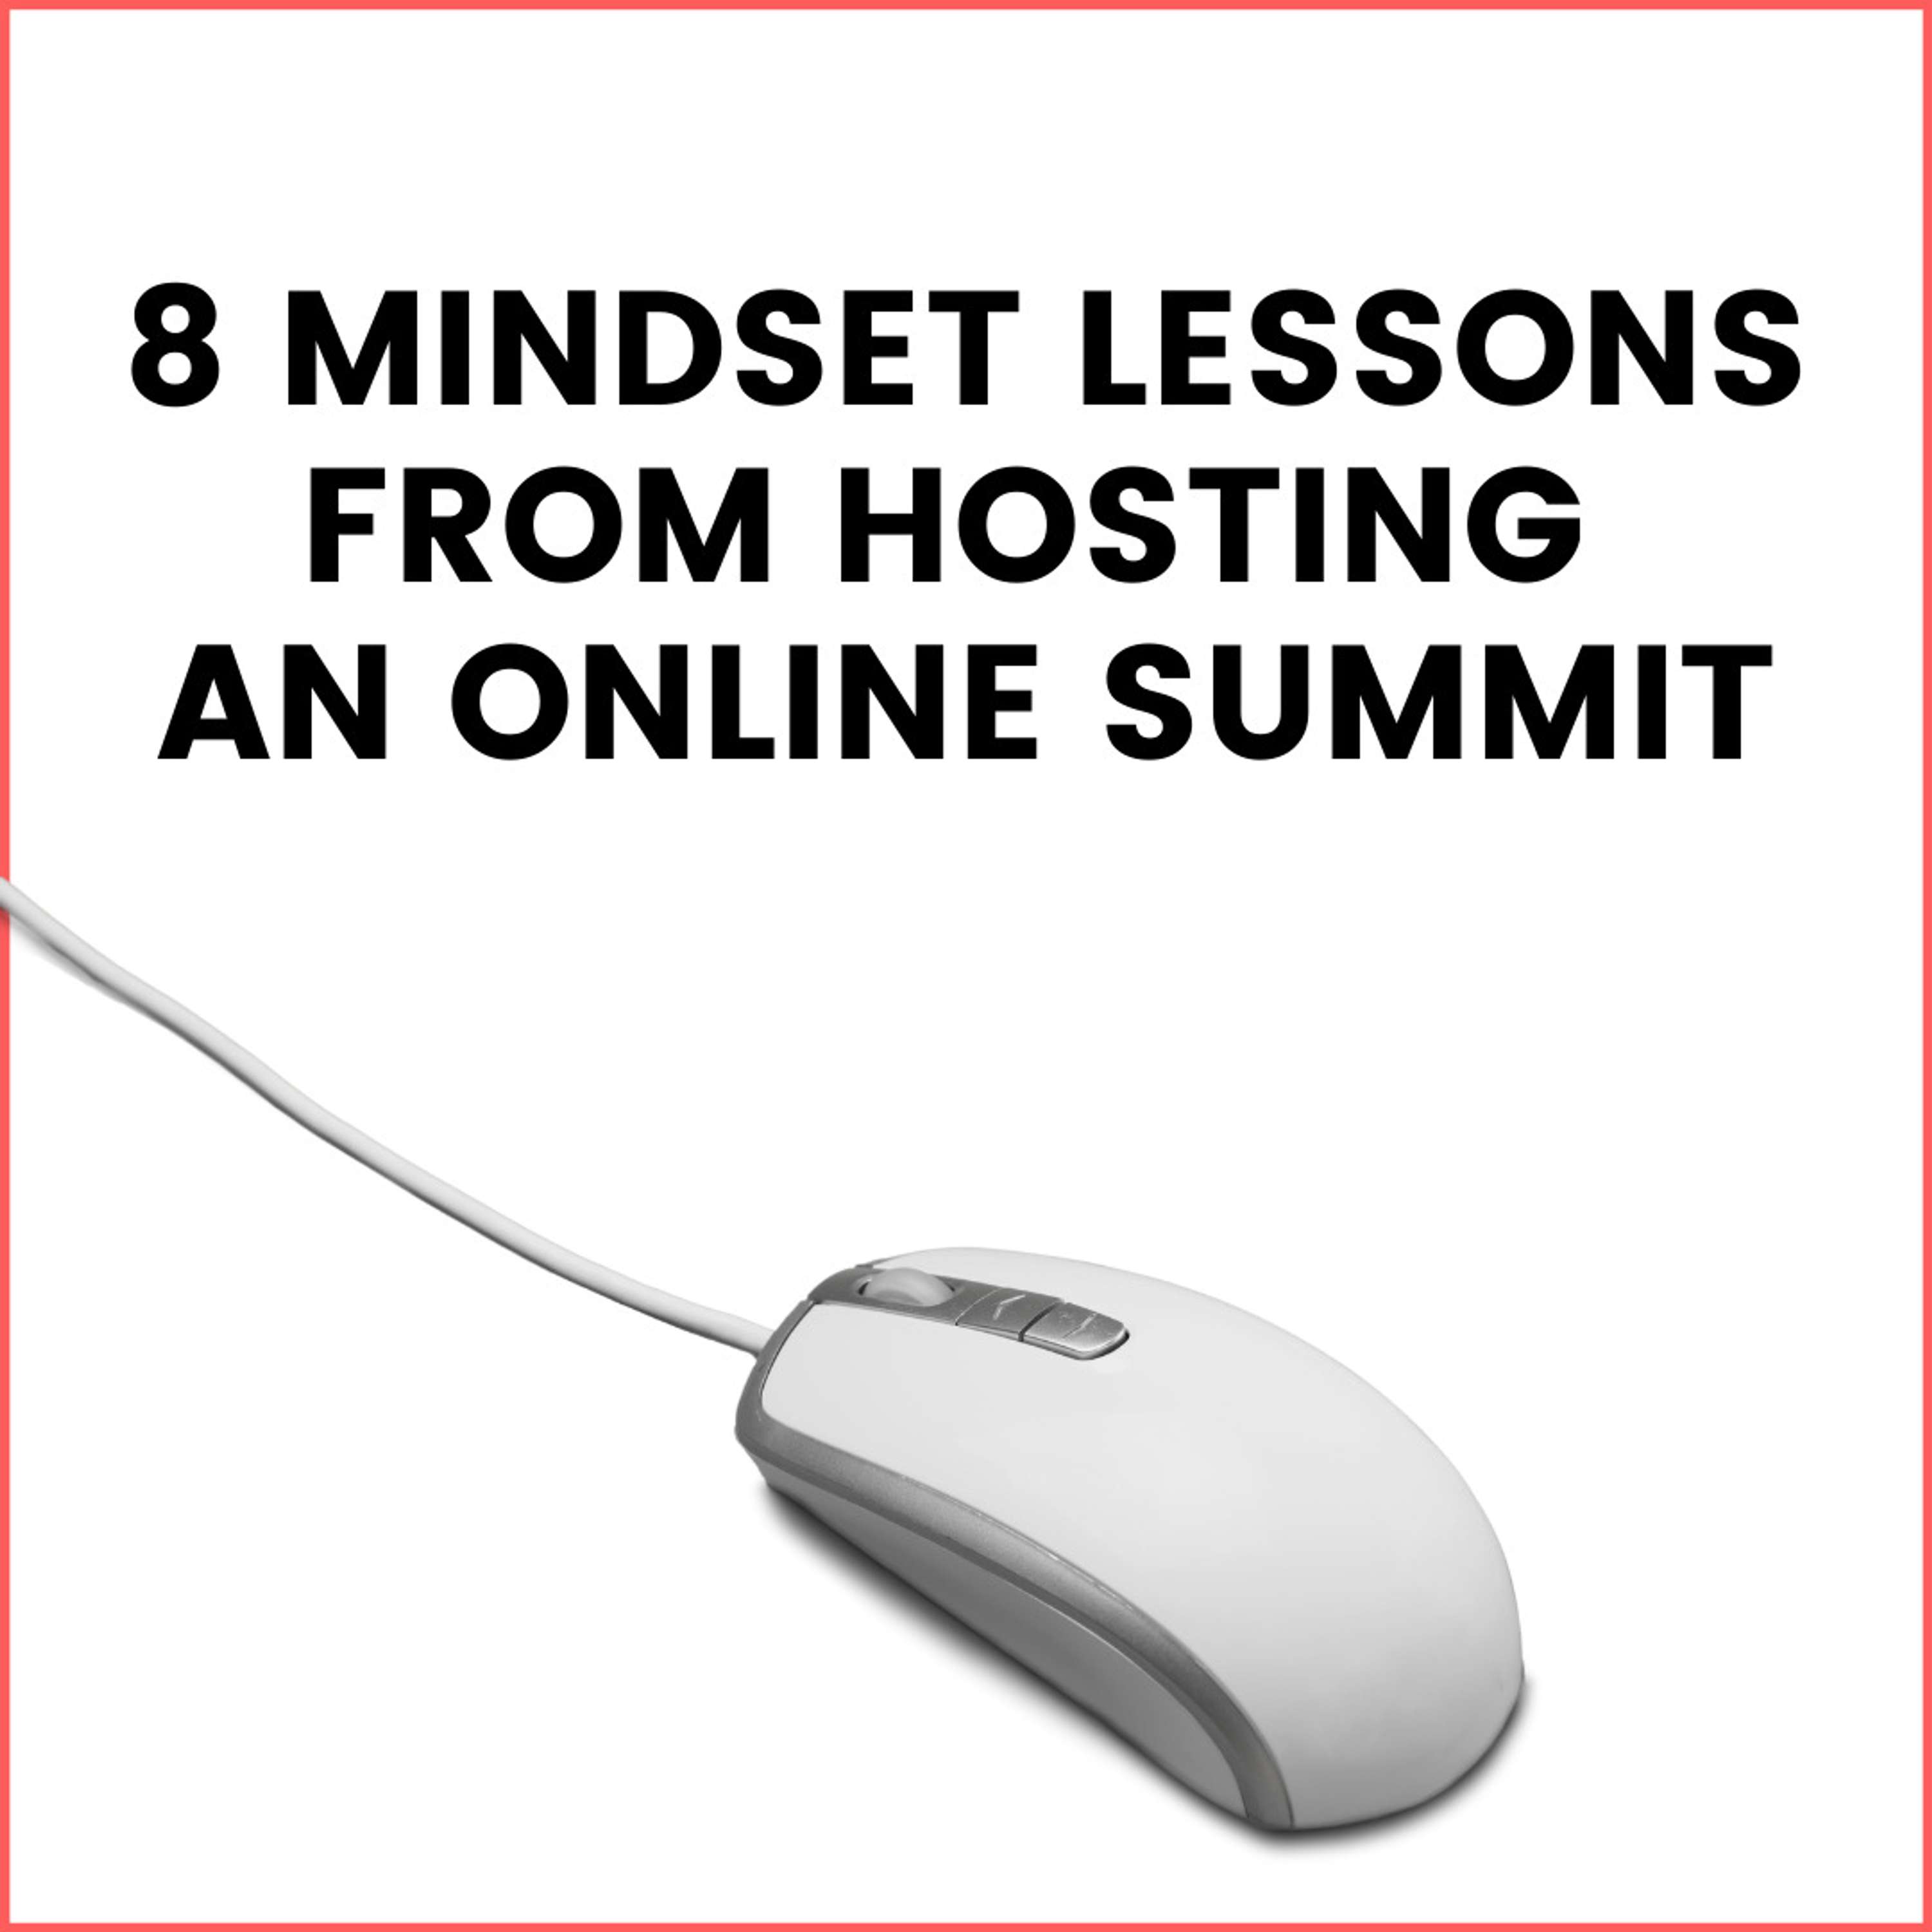 32. 8 Mindset Lessons from Hosting an Online Summit